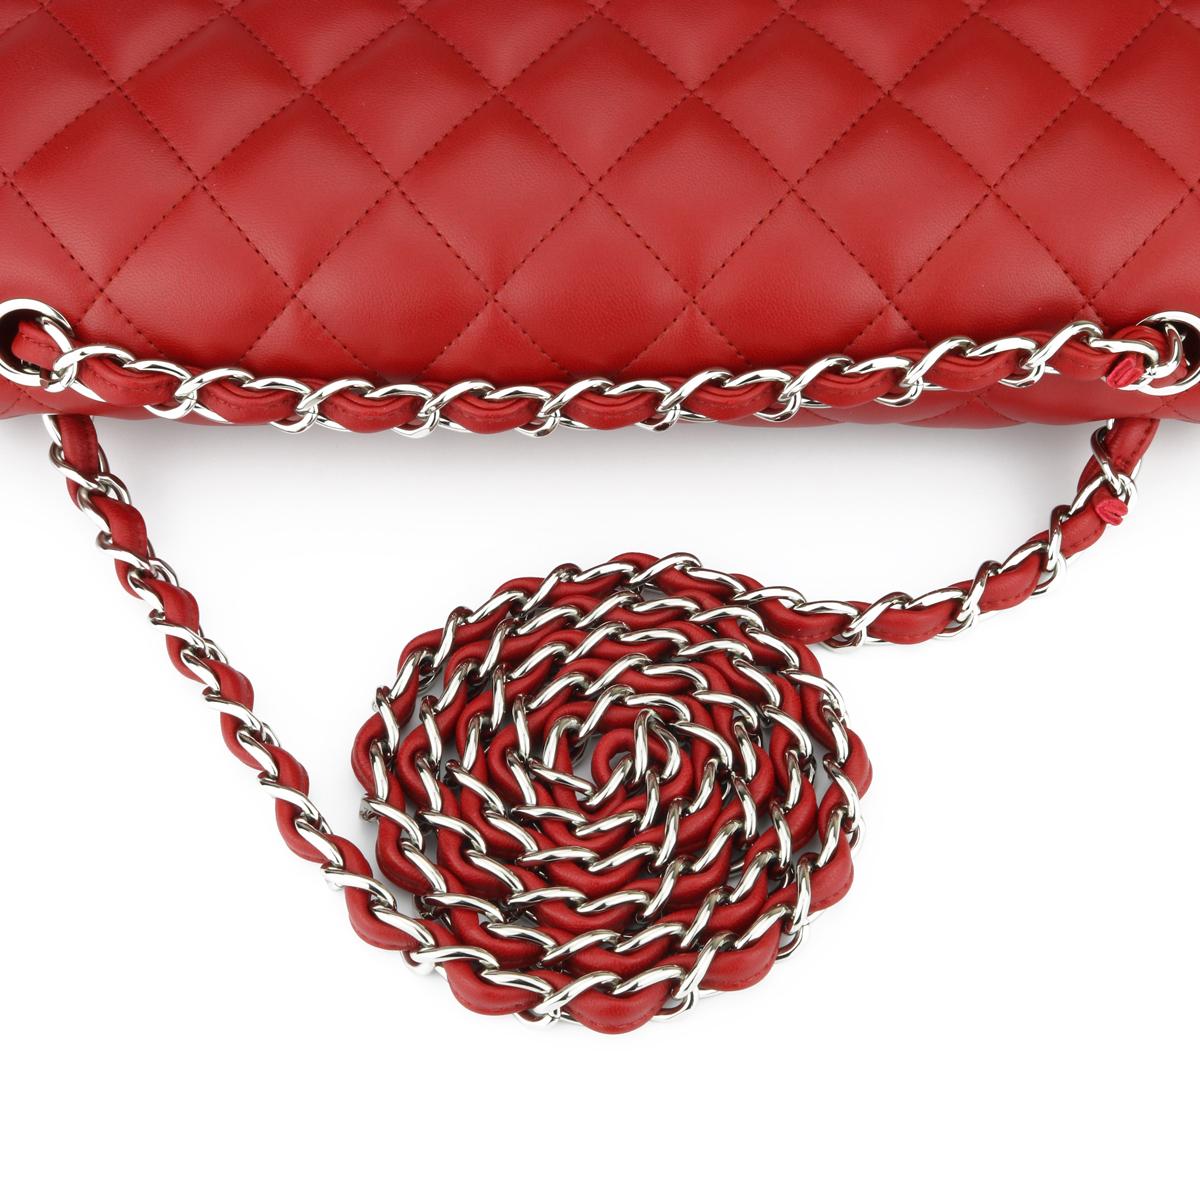 CHANEL Double Flap Jumbo Bag Red Lambskin with Silver Hardware 2013 5